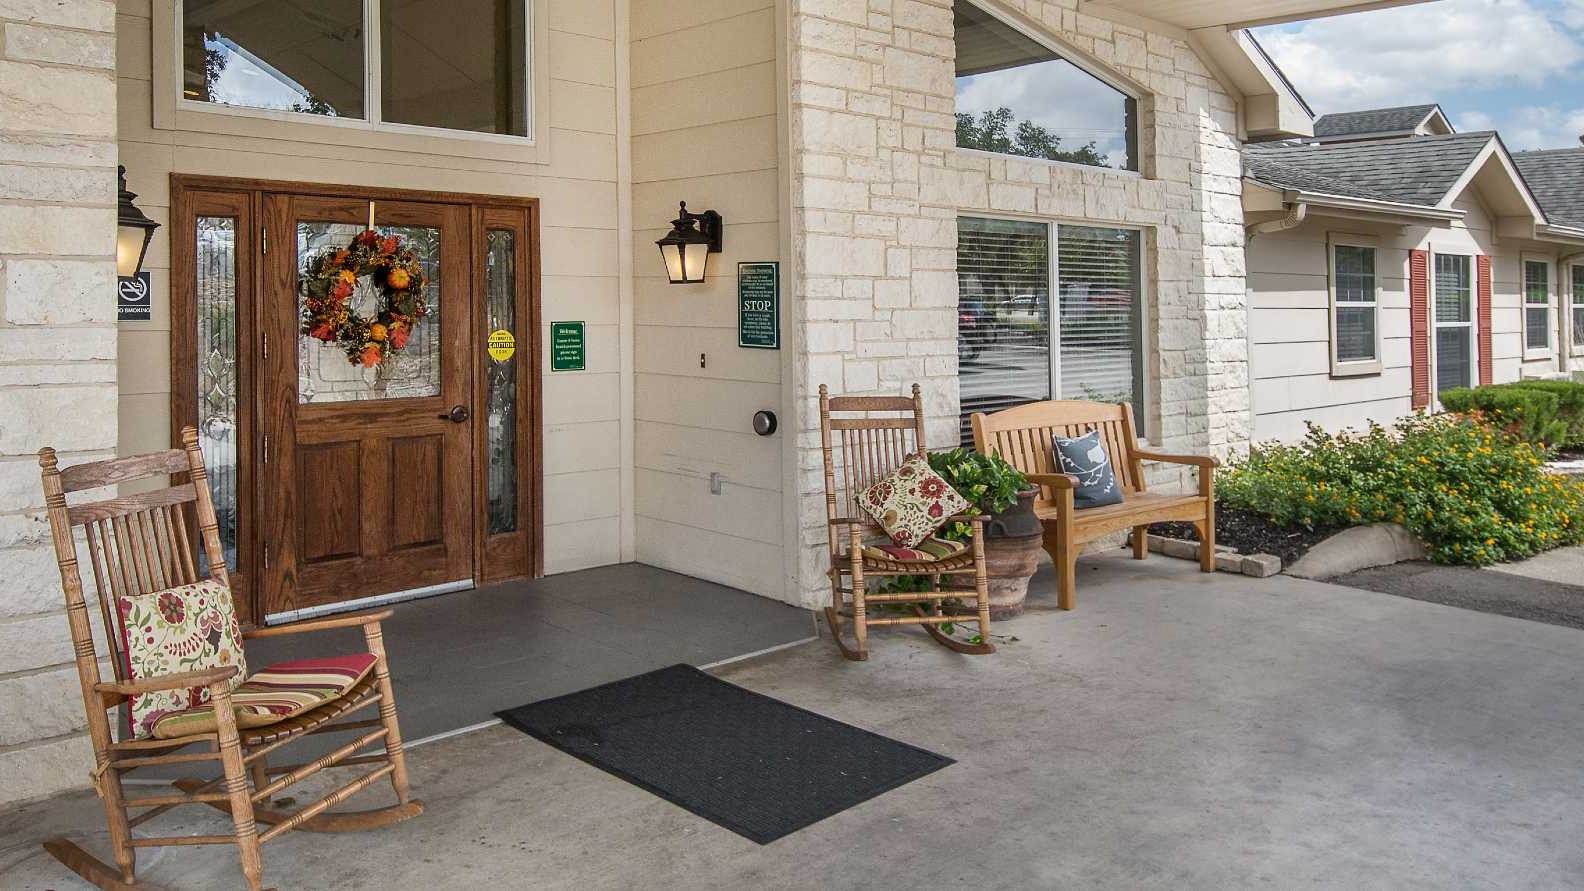 Heritage Place at Boerne welcomes you to join our family!